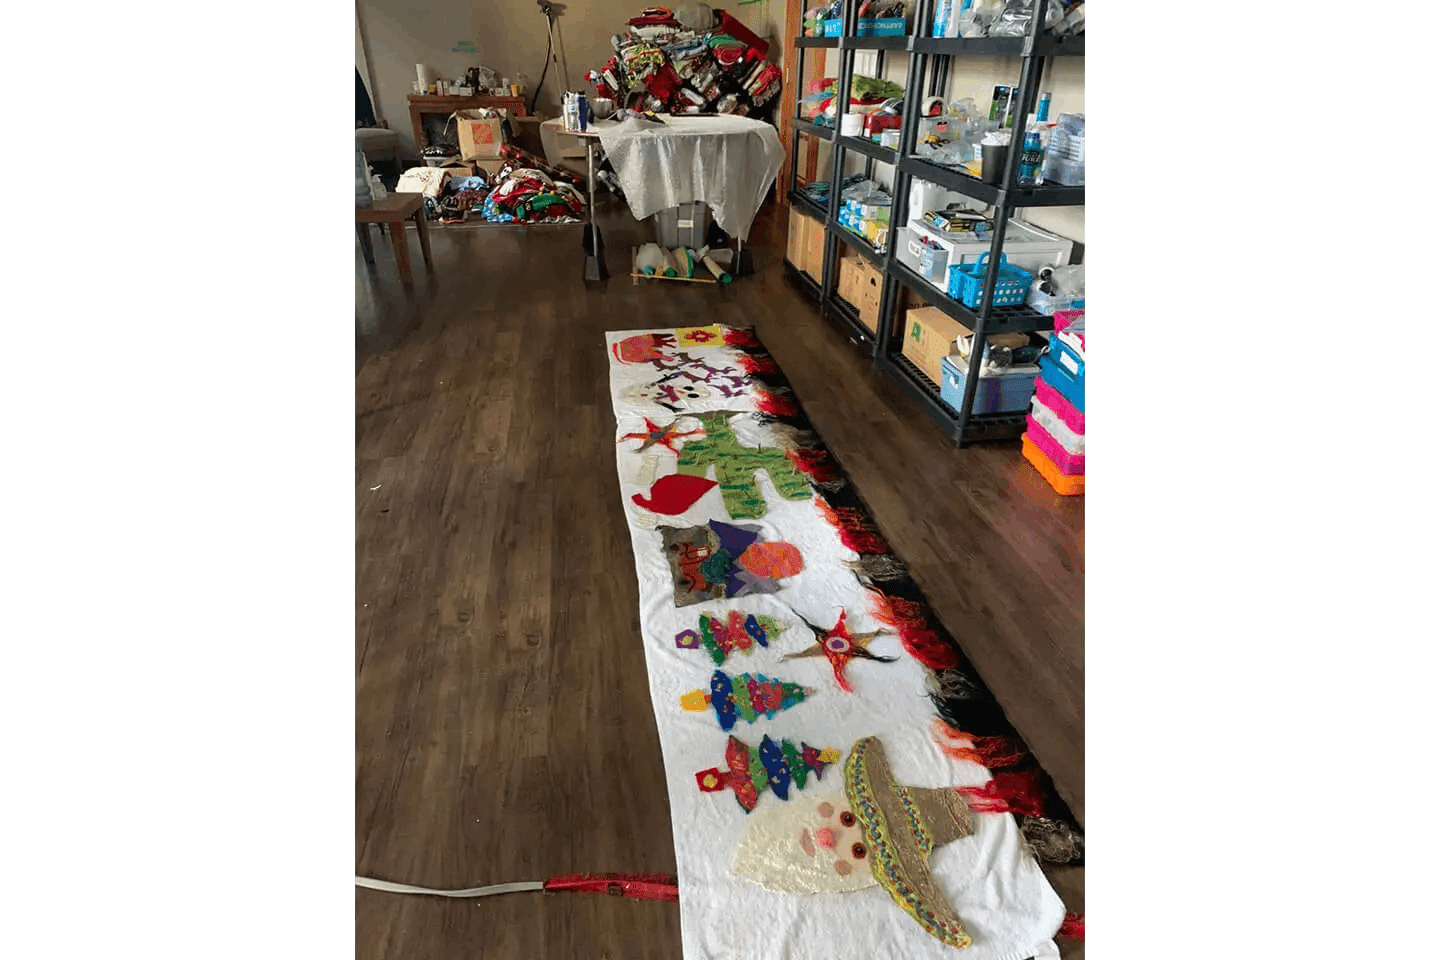 A long table with a large quilt on it